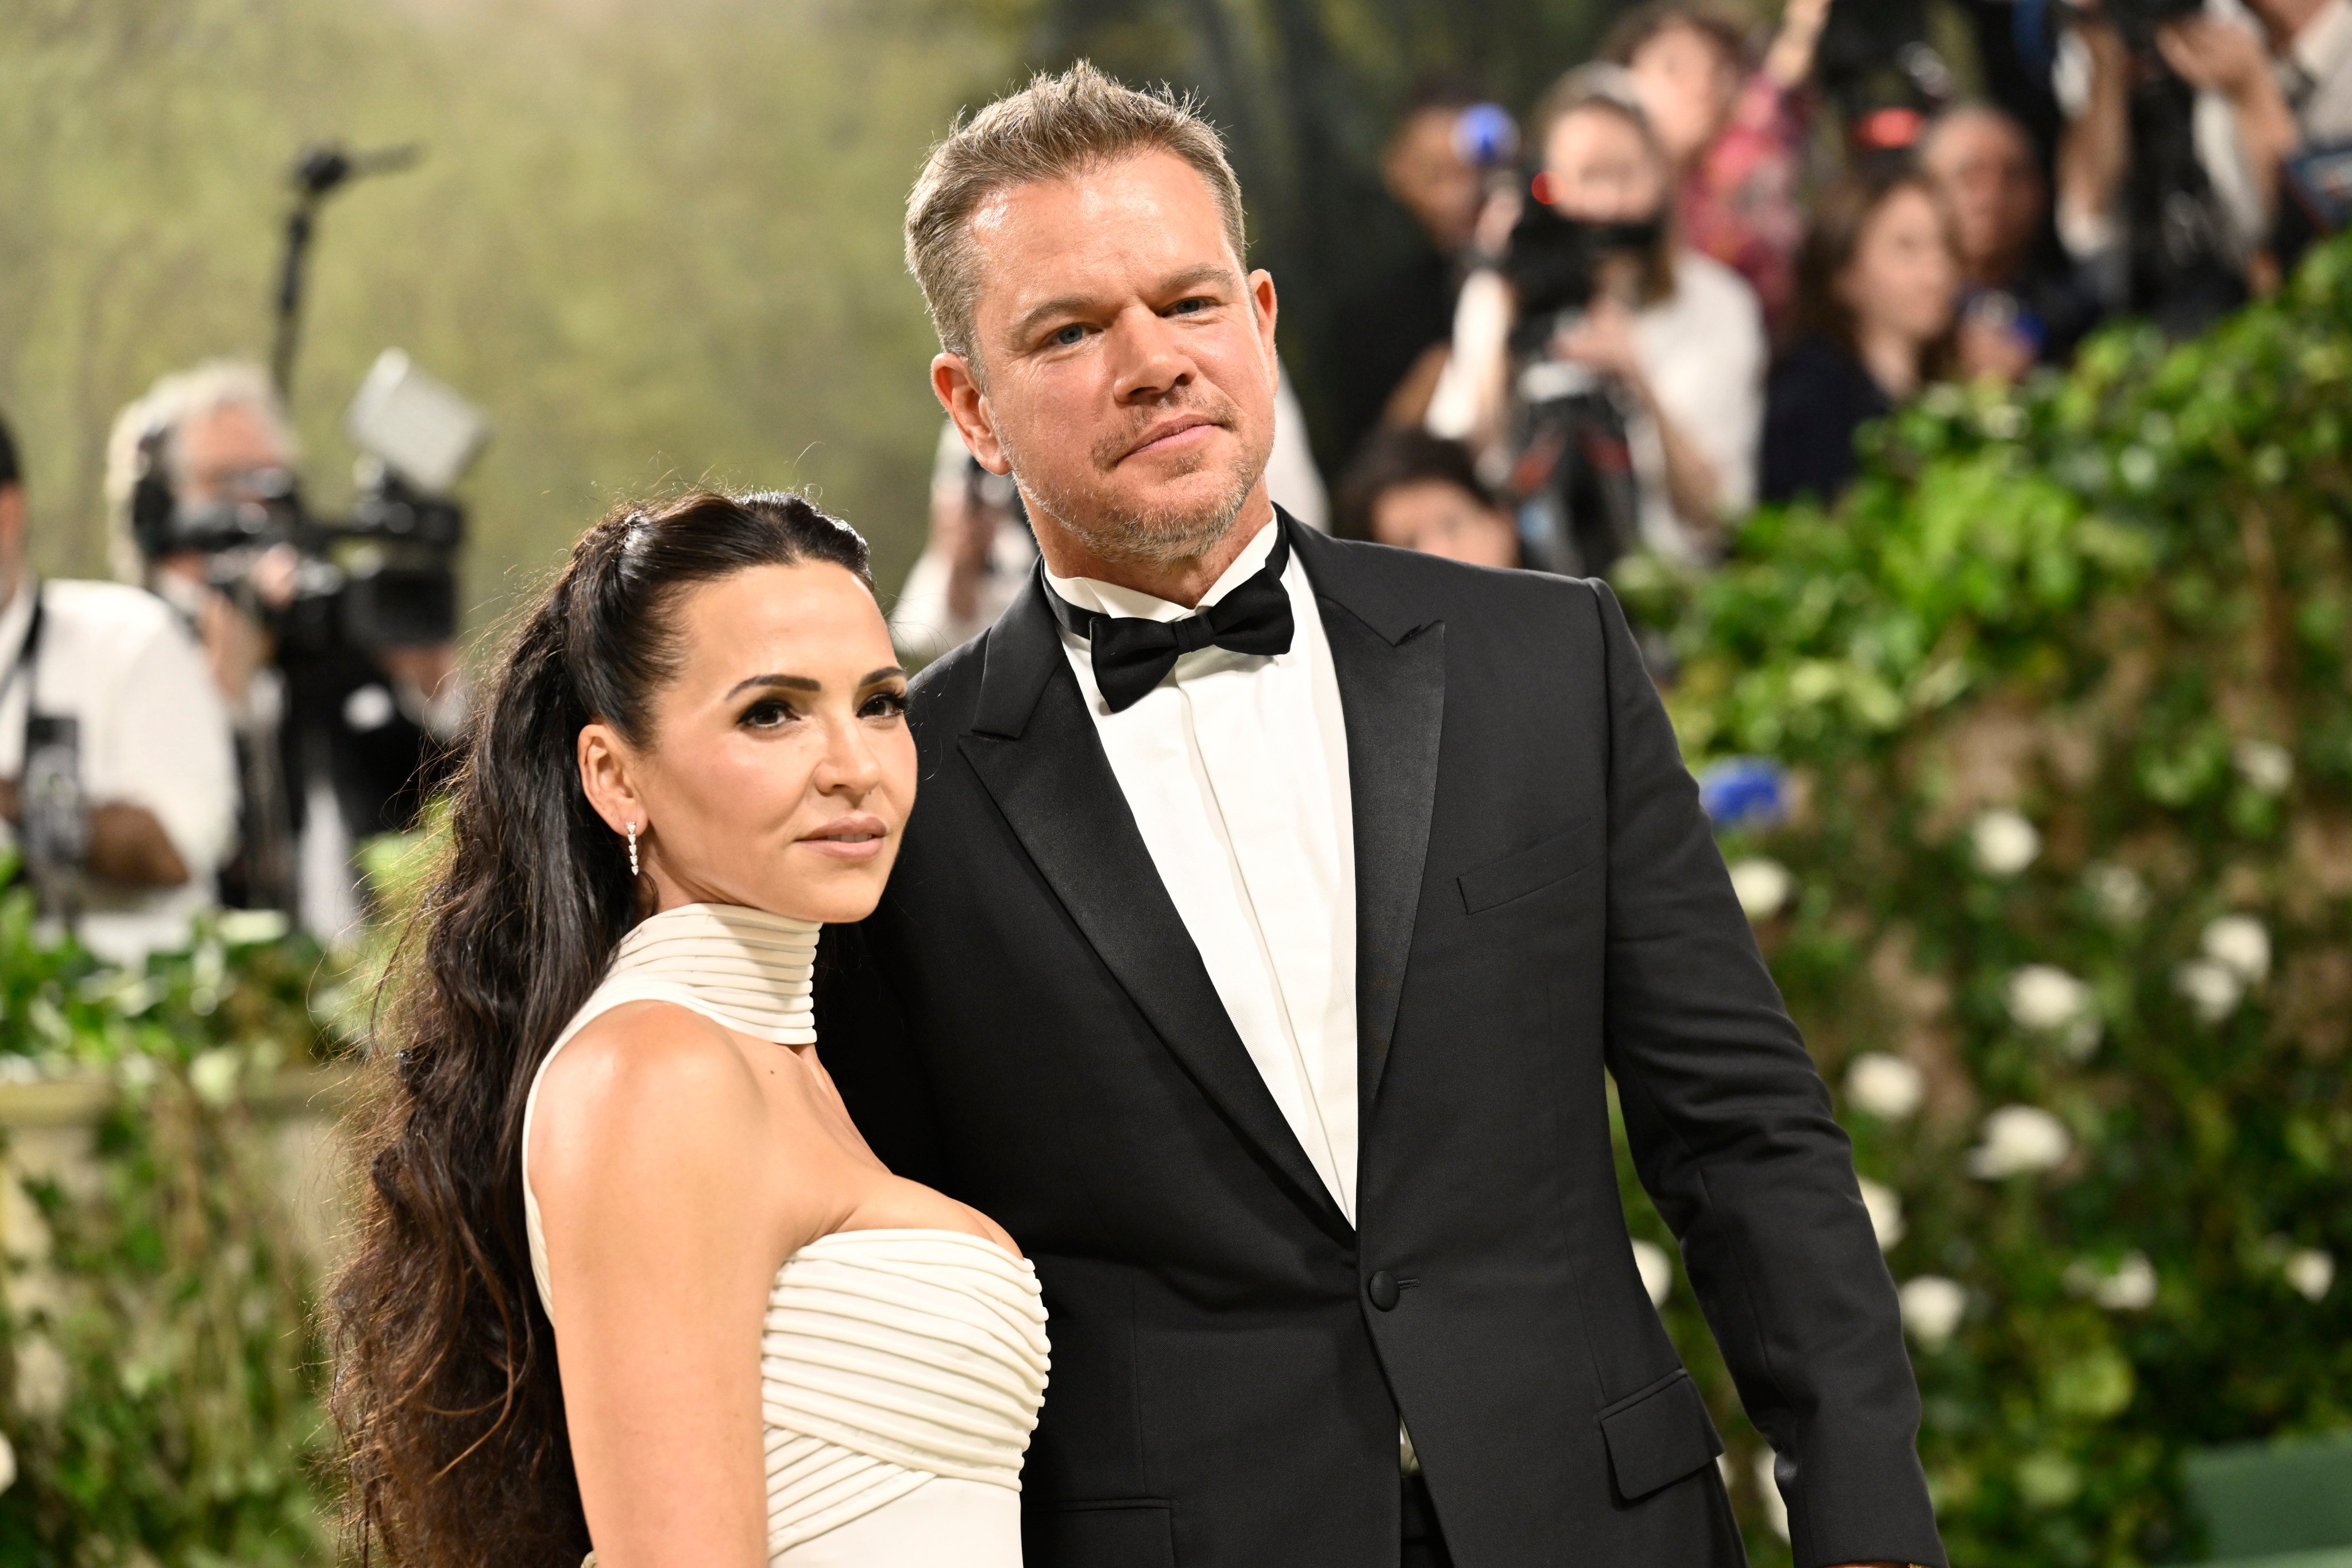 Luciana Barroso (left) and Matt Damon met in a bar in Miami in 2003 – and the rest is history. Photo: Invision/AP